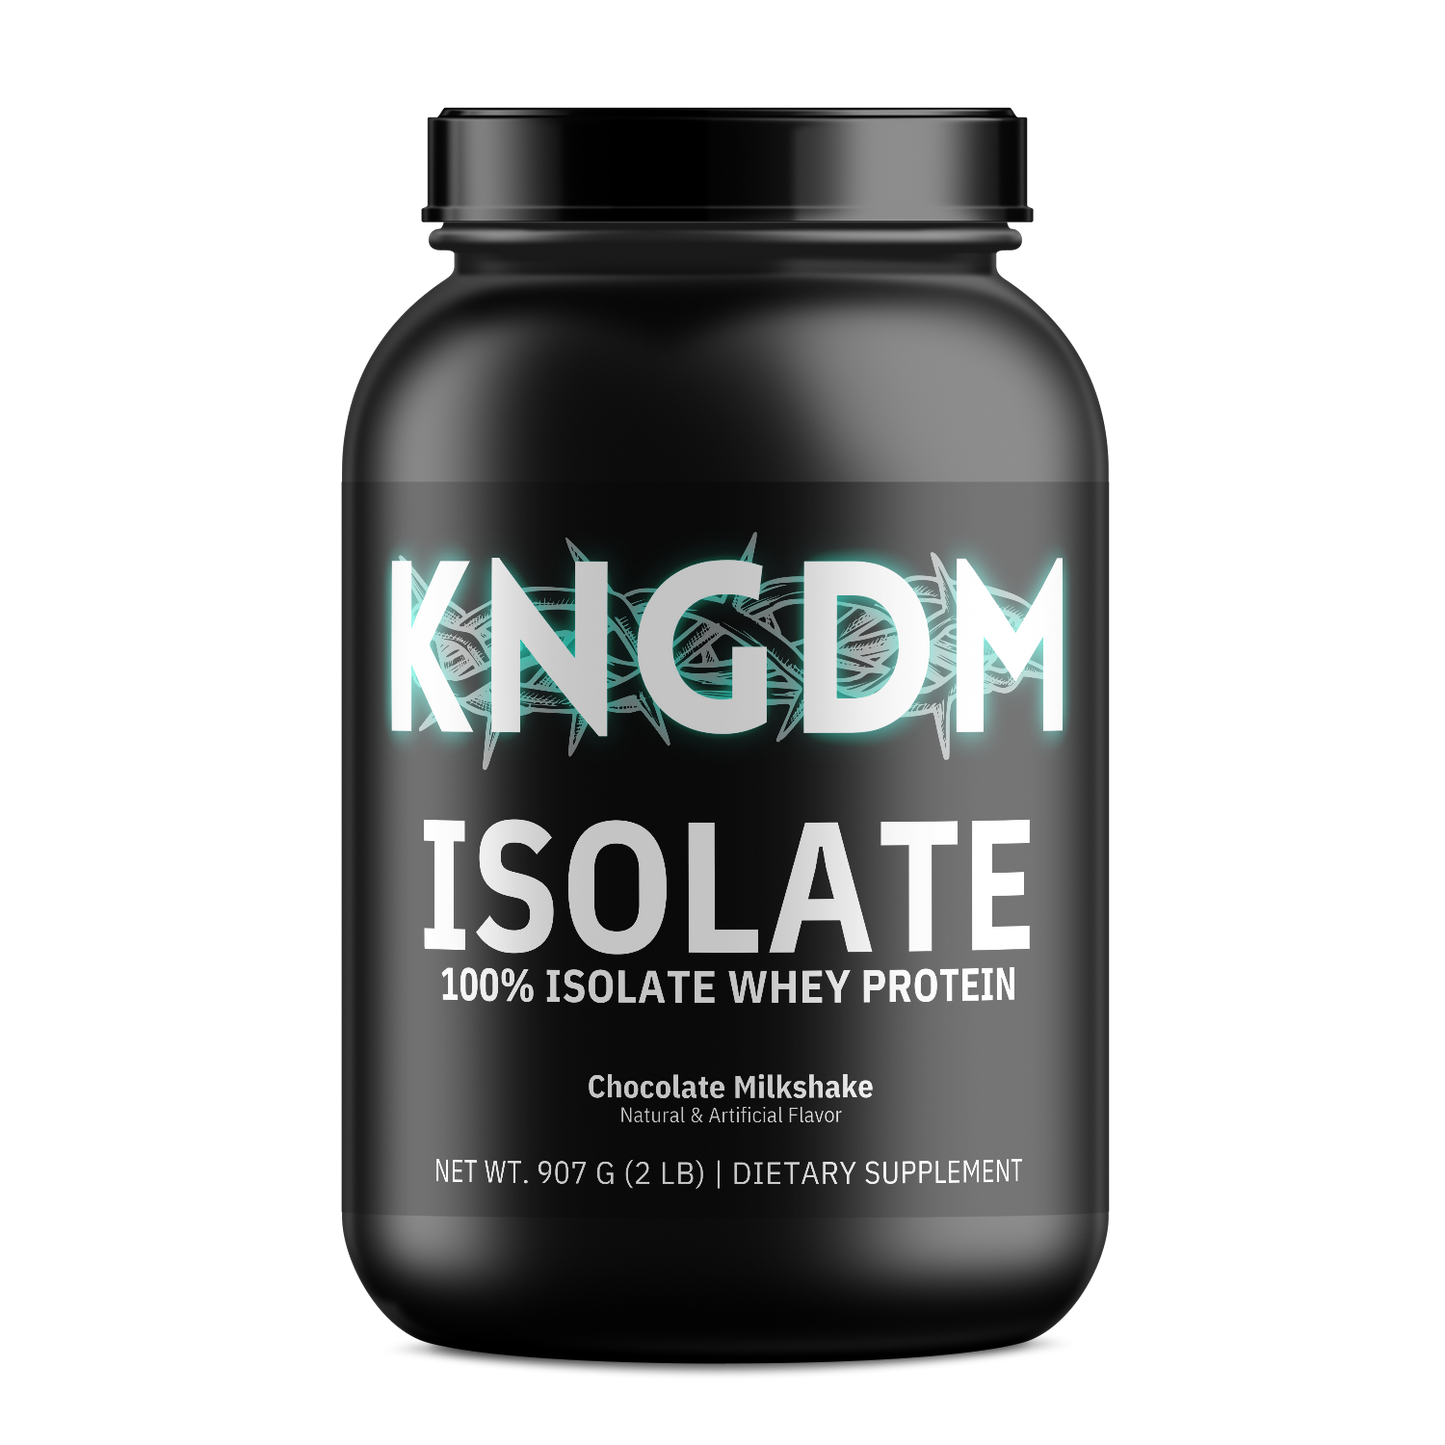 Chocolate Whey Isolate Protein